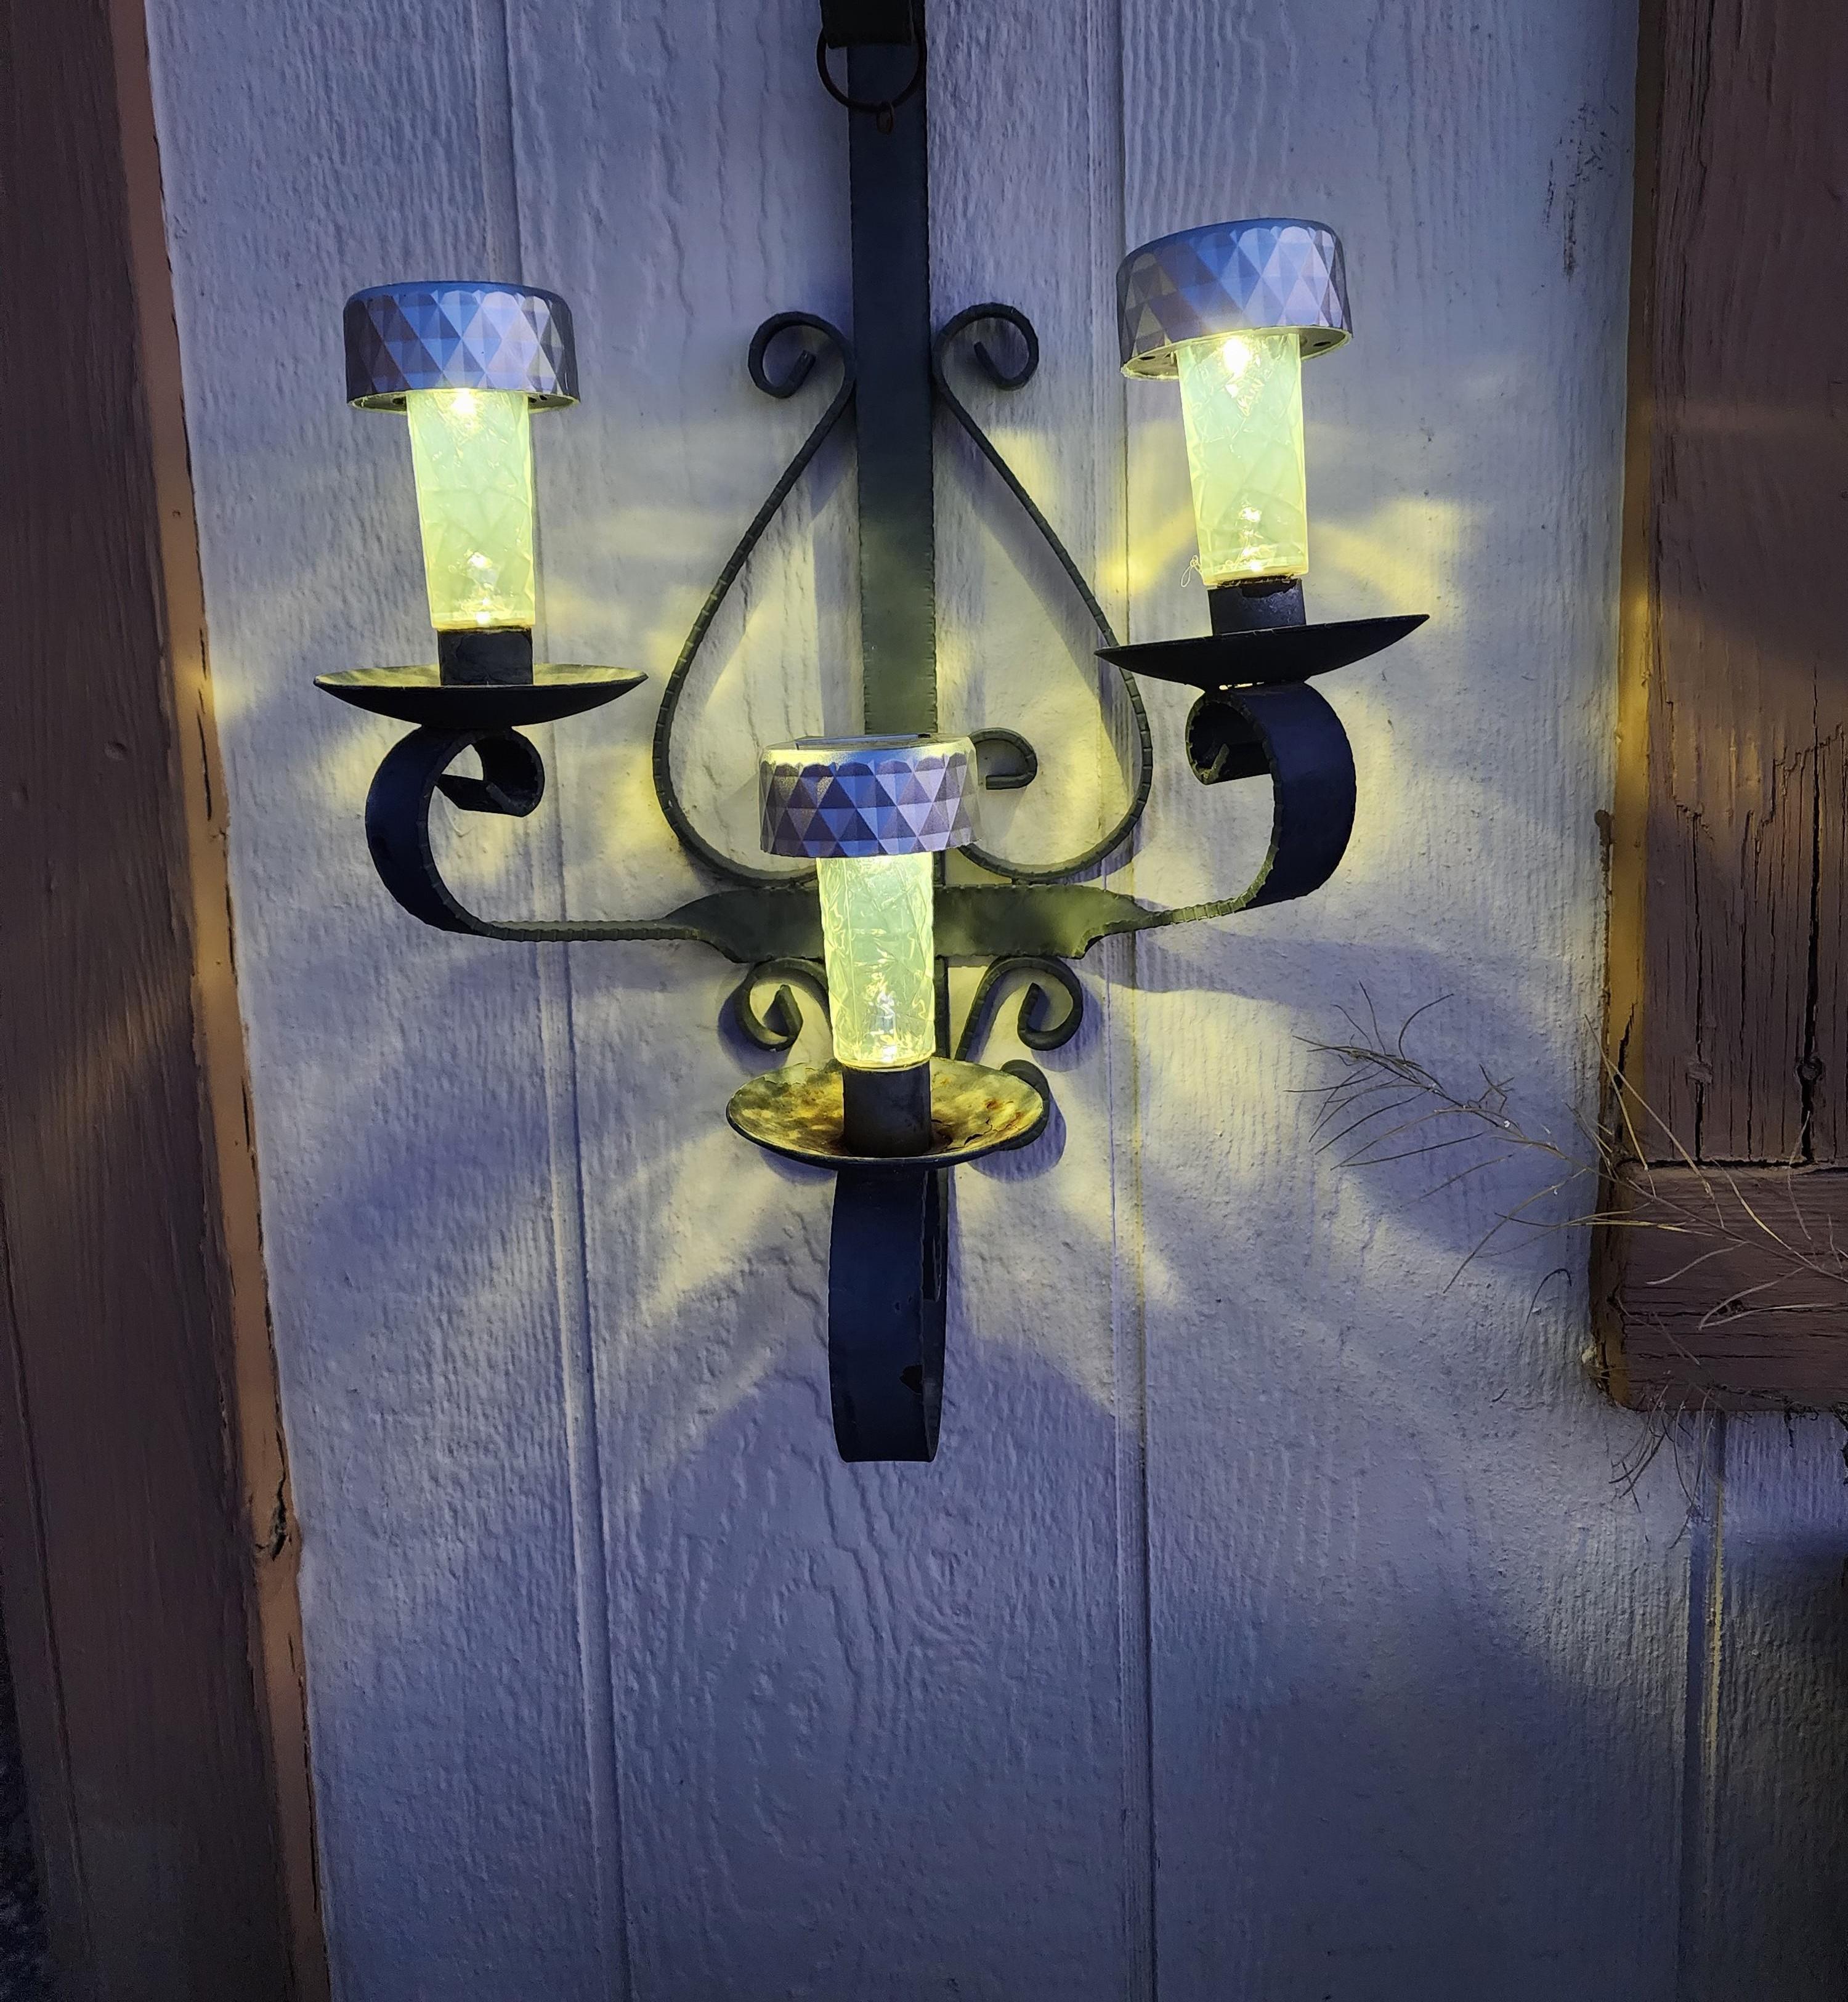 Candlestick Light Converted to Solar Light